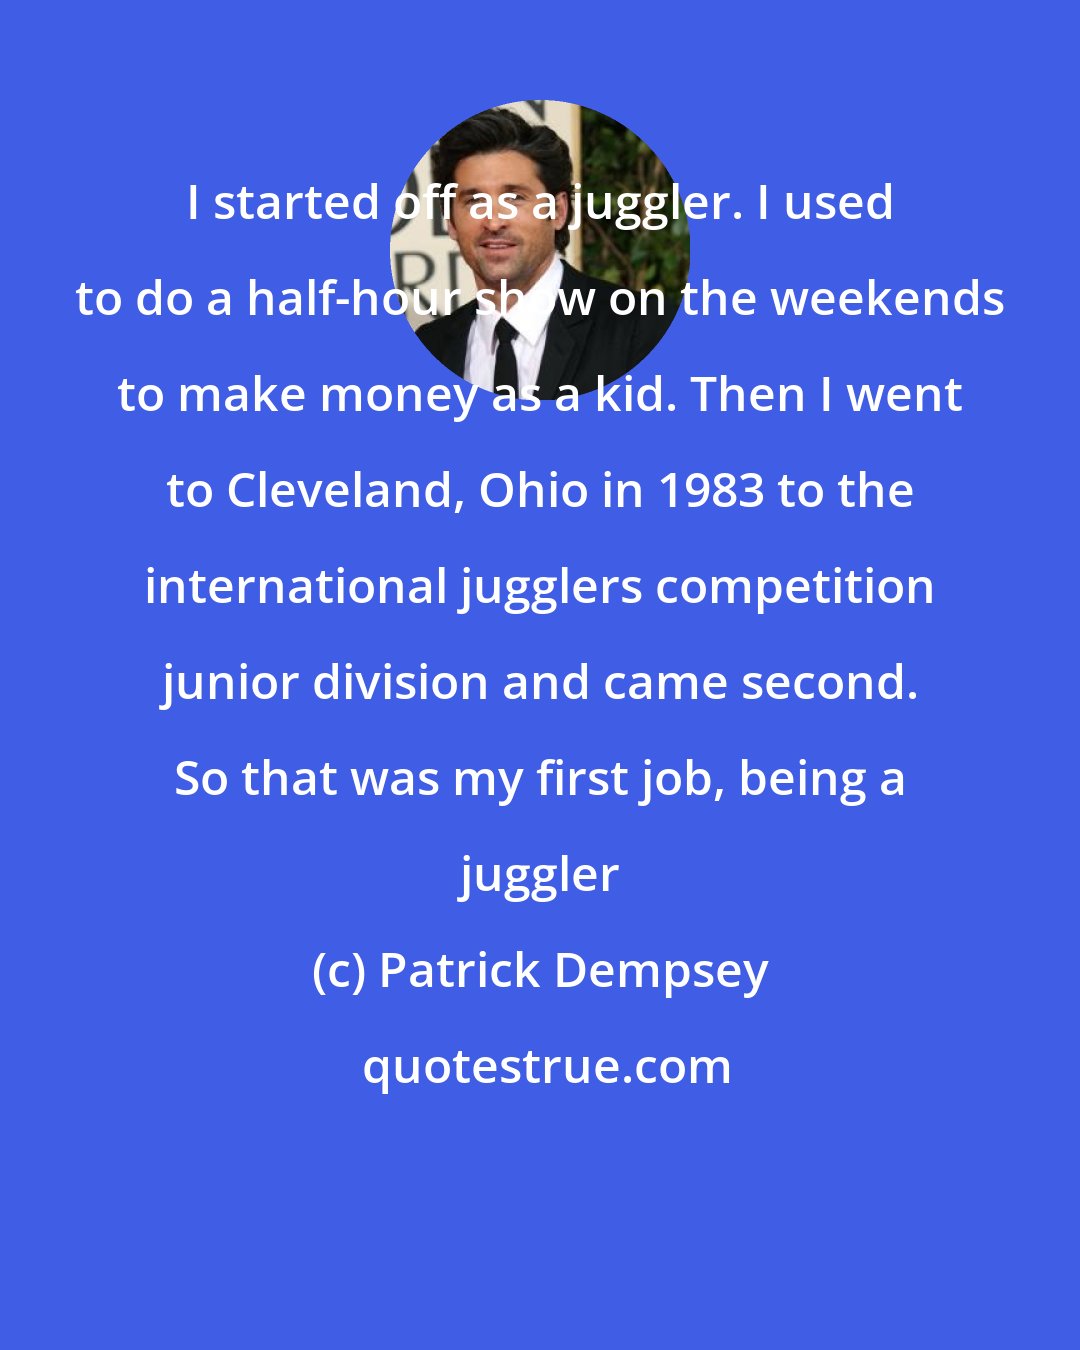 Patrick Dempsey: I started off as a juggler. I used to do a half-hour show on the weekends to make money as a kid. Then I went to Cleveland, Ohio in 1983 to the international jugglers competition junior division and came second. So that was my first job, being a juggler